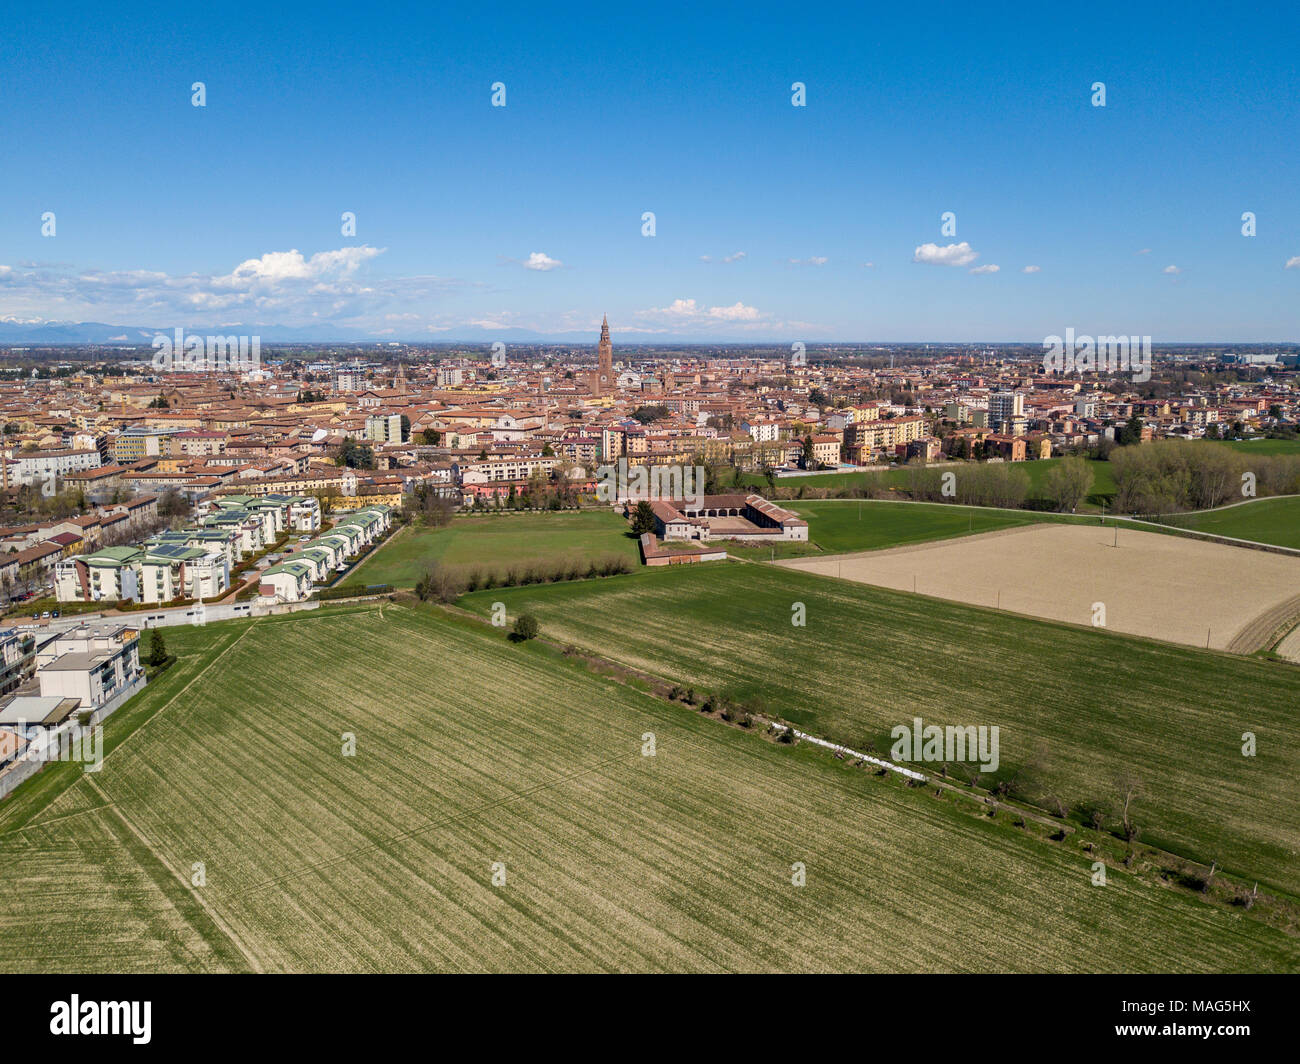 Aerial view of the city of Cremona, Lombardy, Italy. Cathedral and Torrazzo of Cremona, the tallest bell tower in Italy 112 meters high Stock Photo